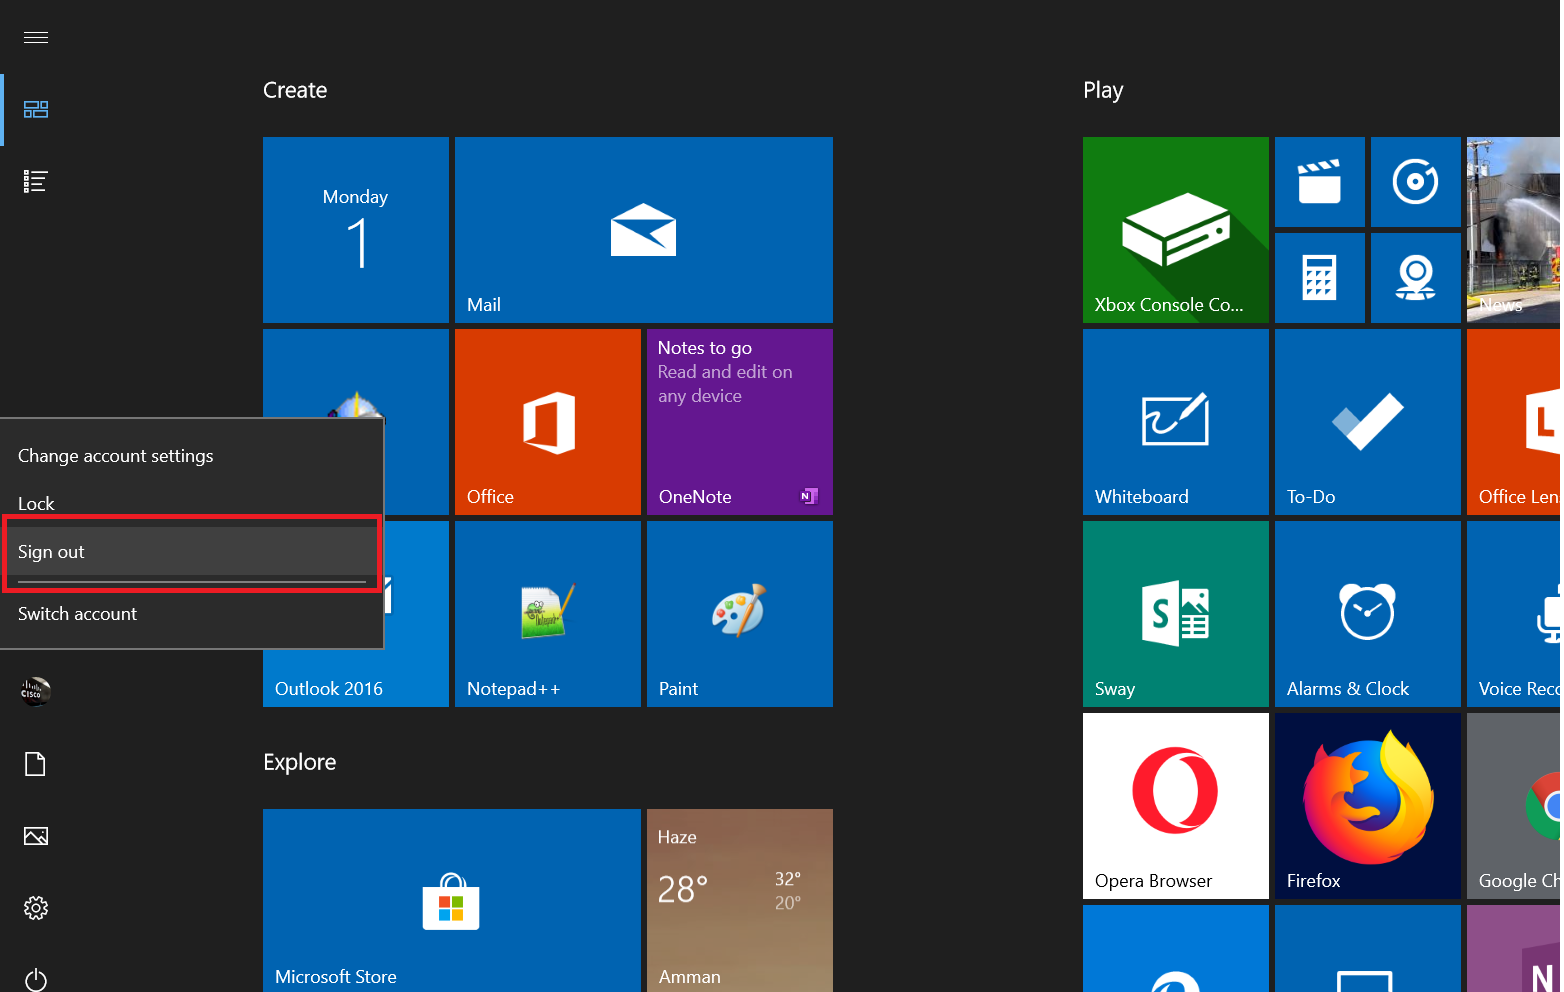 how can I hide sign out option from the start menu ? 0a953c33-15eb-4f09-9960-4f6fb3c83cd7?upload=true.png